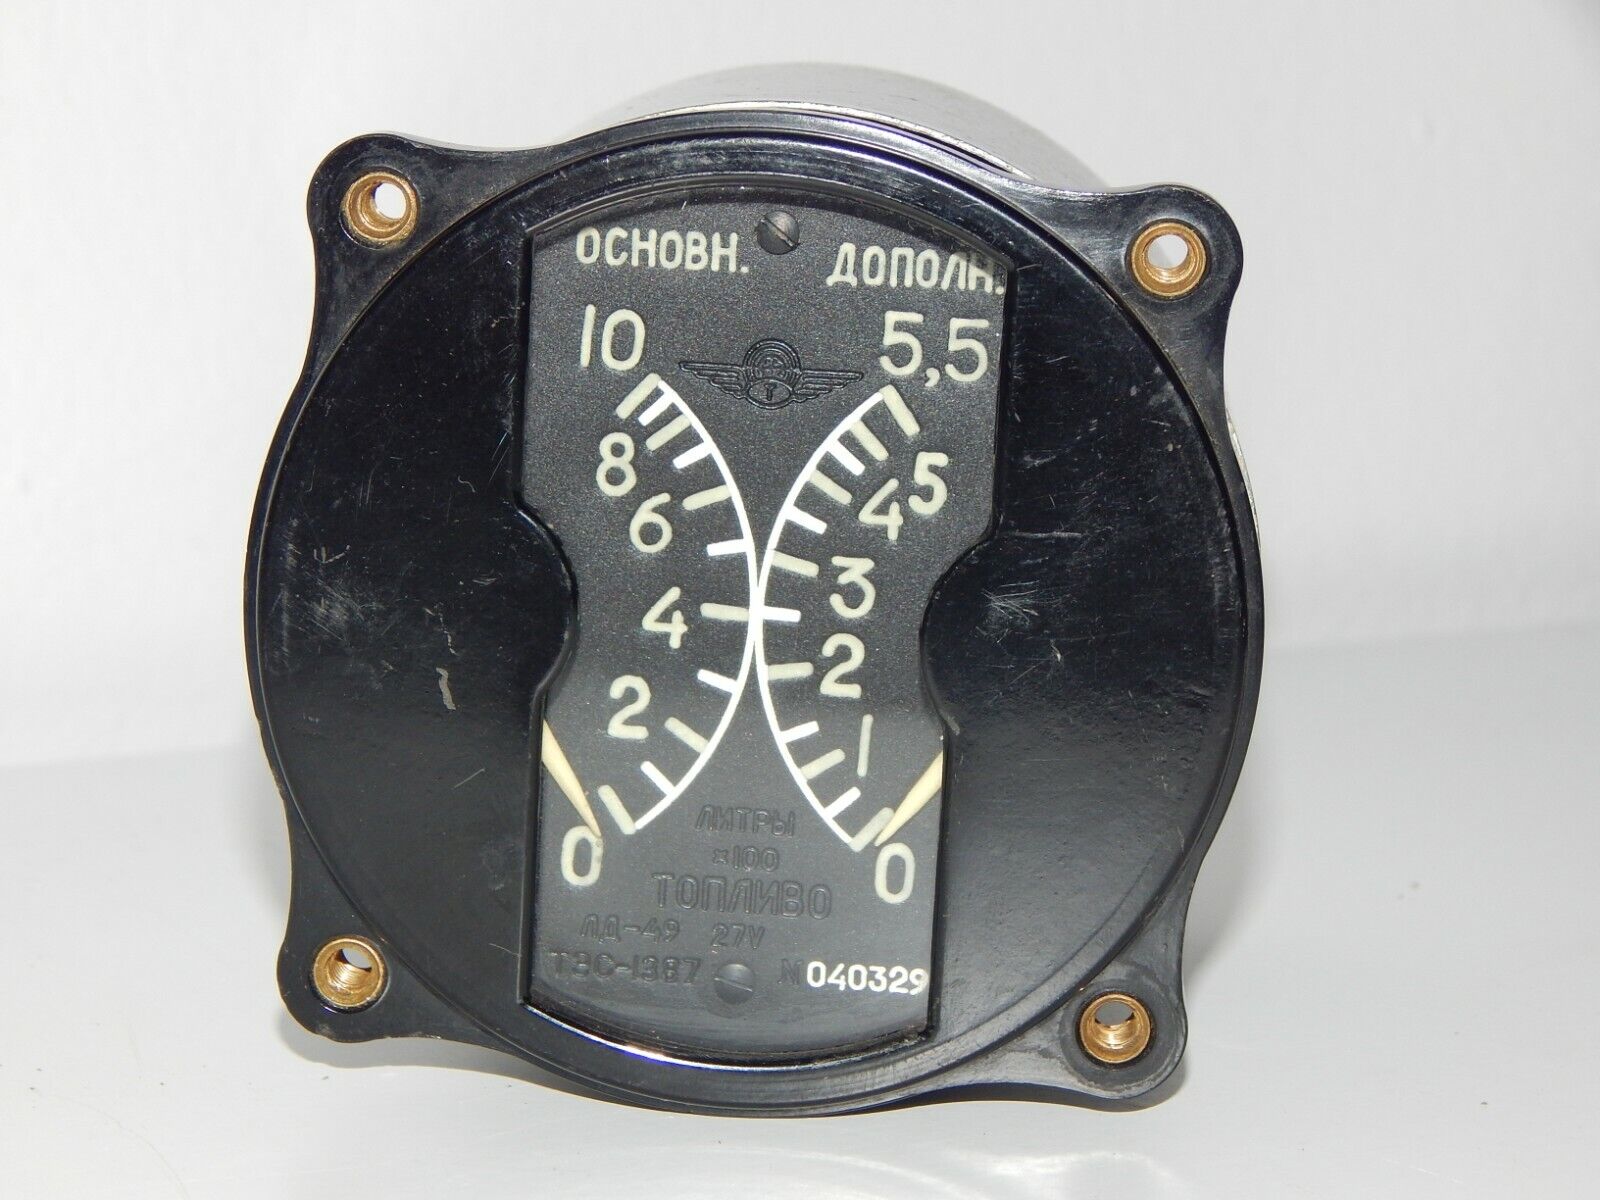 used  Aircraft IL-76 IL-18 An-26 An-14 Fuel Indicator LD-49 Gauge IL An Tu